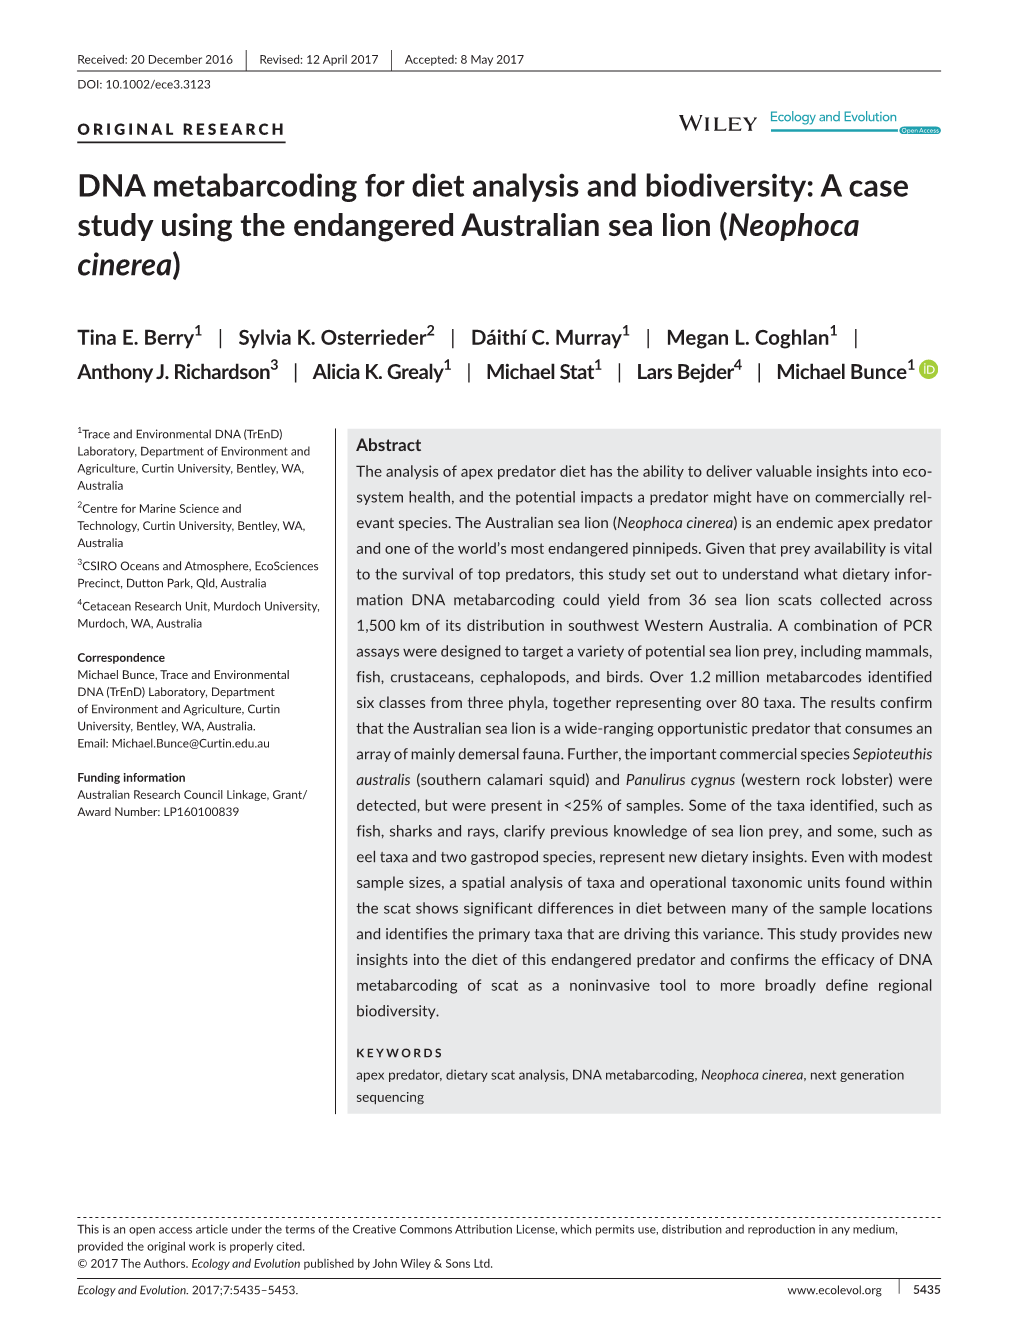 DNA Metabarcoding for Diet Analysis and Biodiversity: a Case Study Using the Endangered Australian Sea Lion (Neophoca Cinerea)